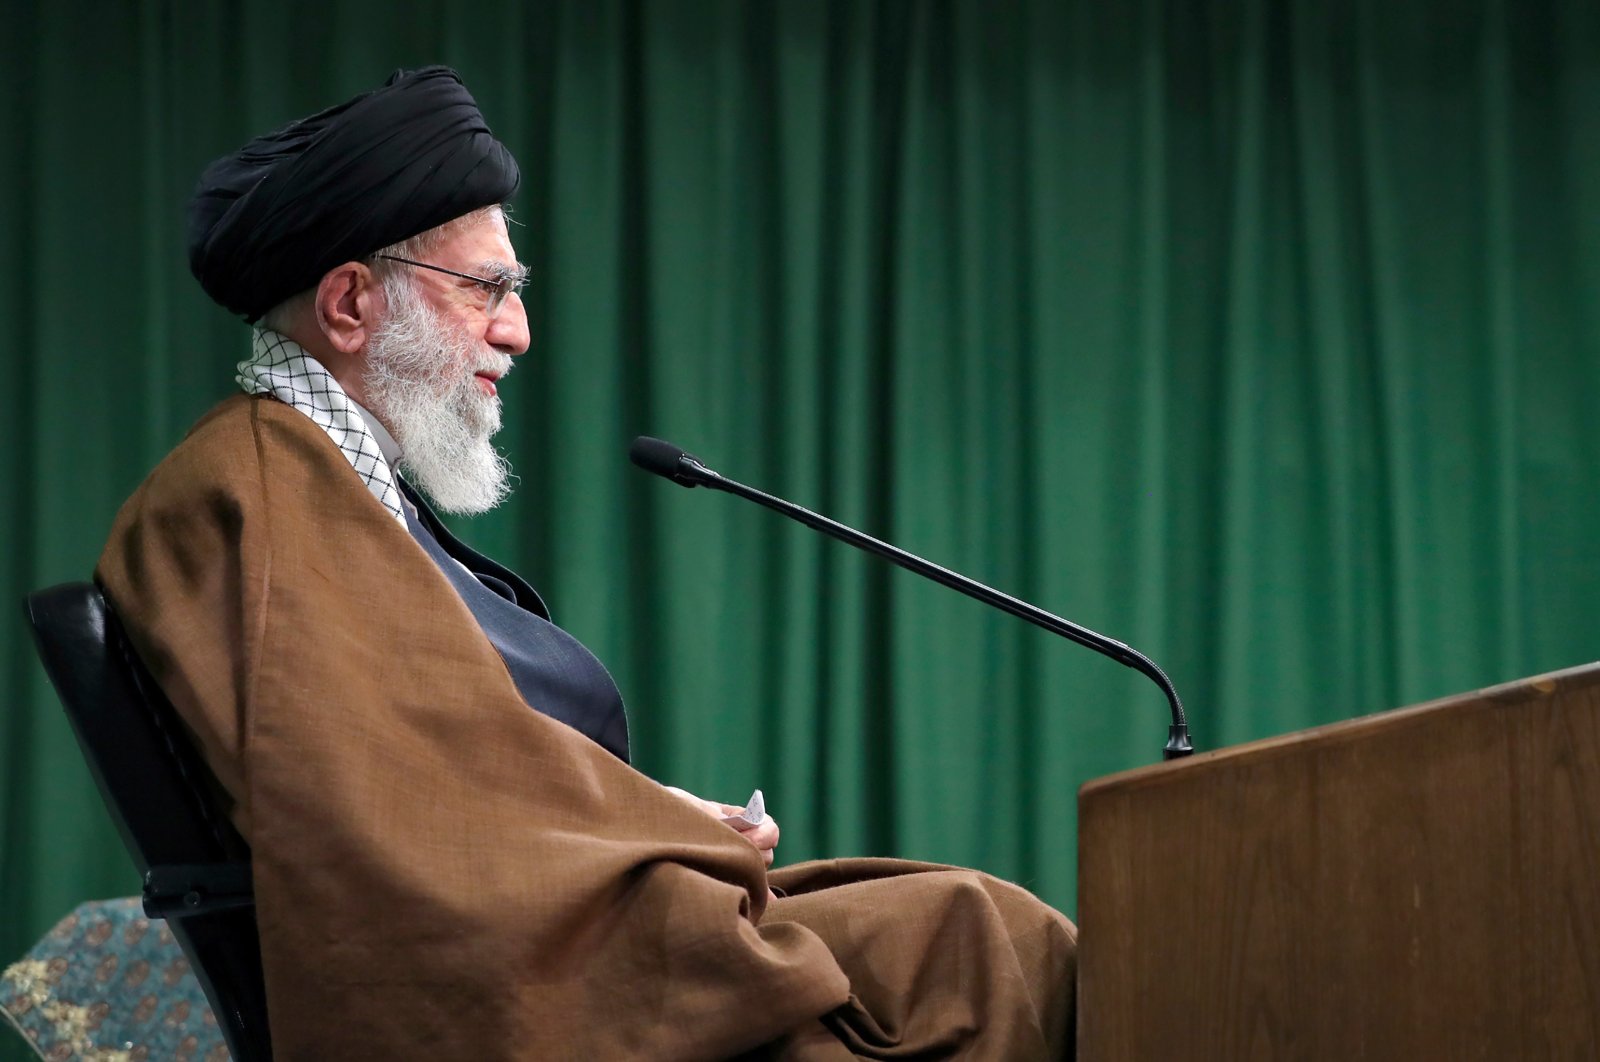 In this picture released by the office of the Iranian supreme leader, Supreme Leader Ayatollah Ali Khamenei addresses the nation in a televised speech marking the birthday of Islam's Prophet Muhammad, in Tehran, Iran, Nov. 3, 2020. (Office of the Iranian Supreme Leader via AP)